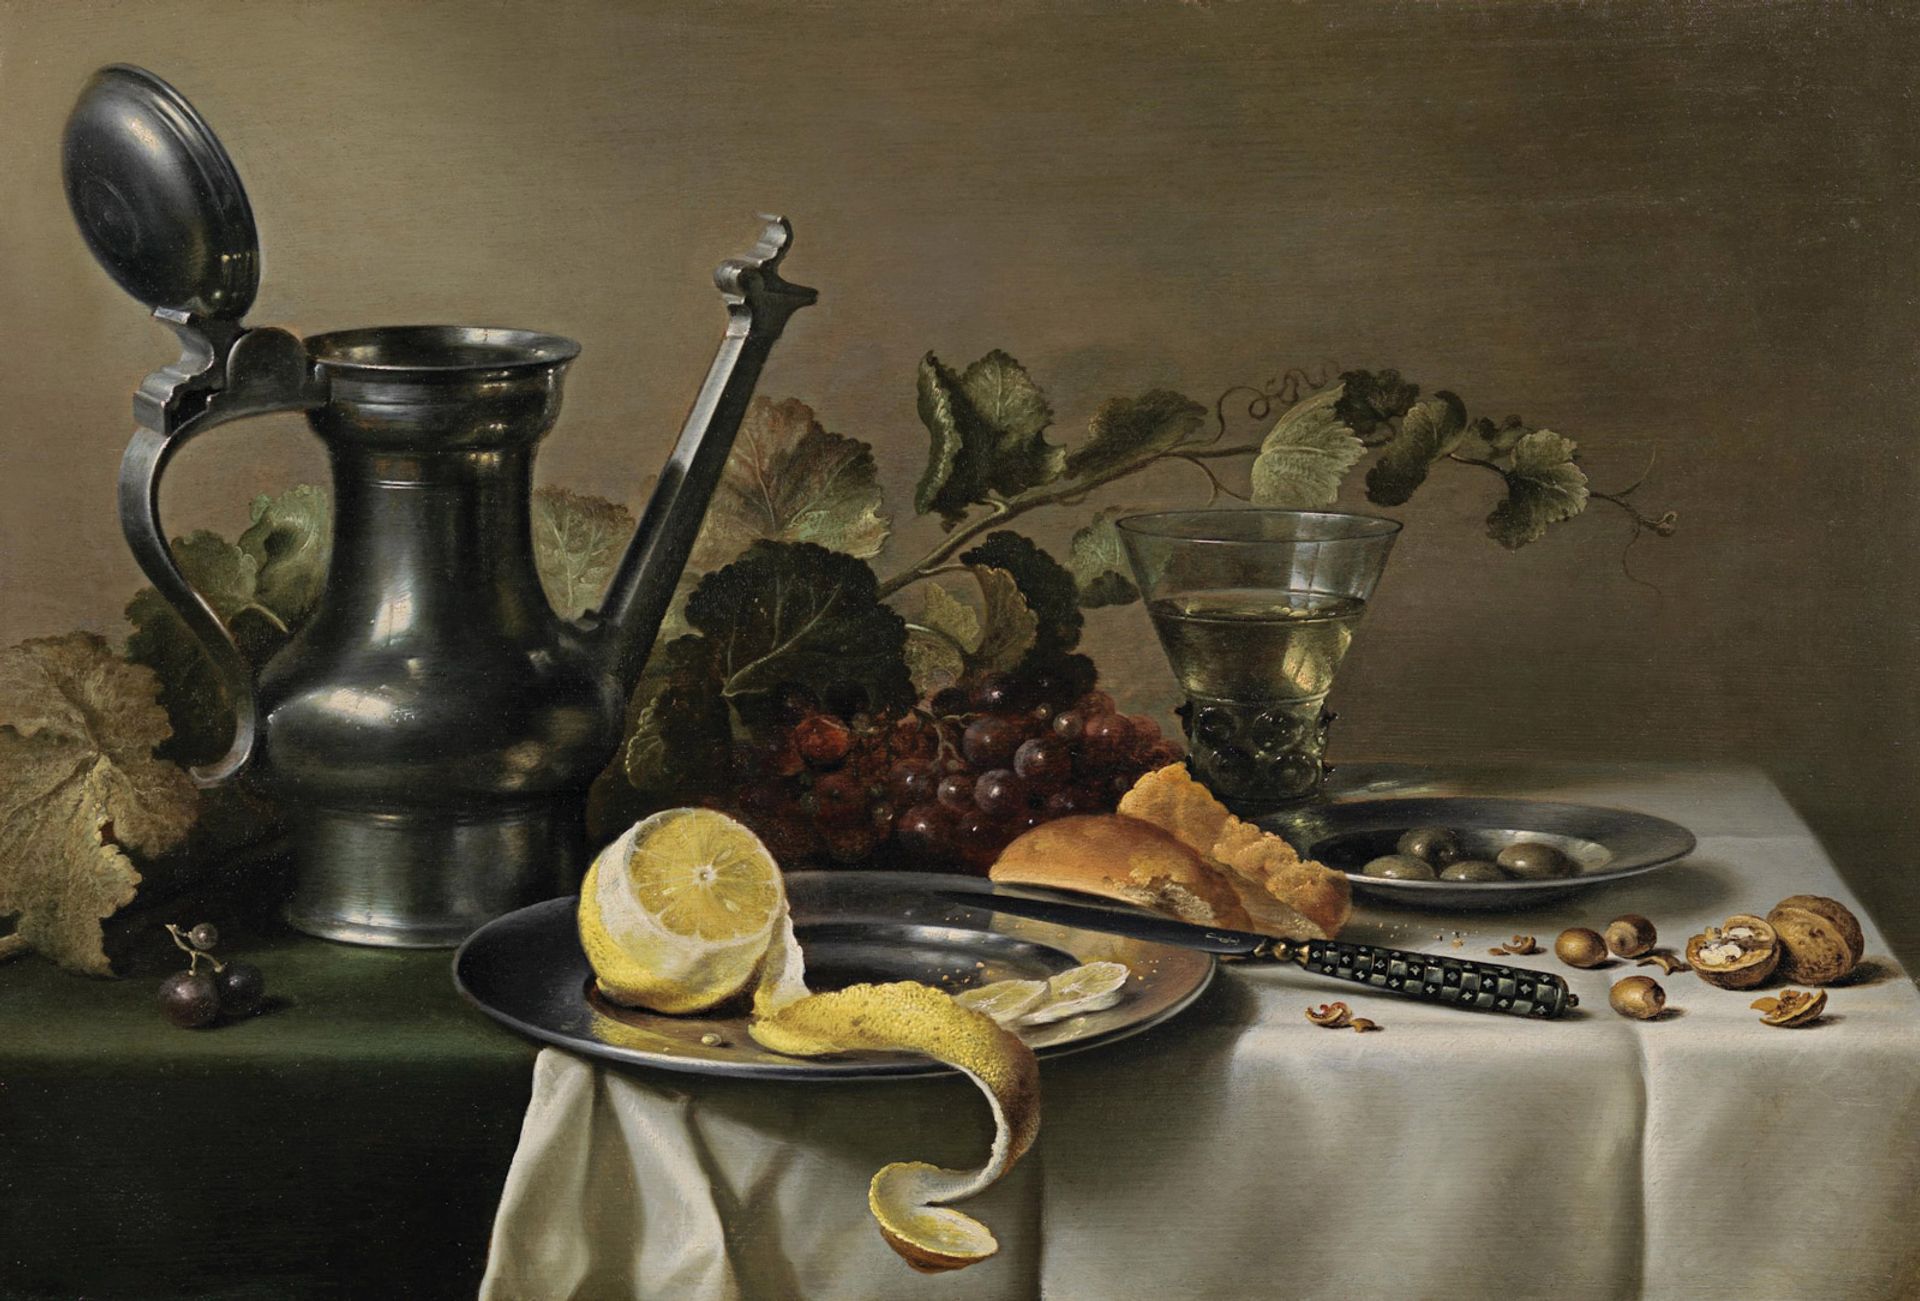 Pieter Claesz’s Still life with a pewter jug, a peeled lemon on a pewter plate, bread, a knife, a berkemeyer and vine leaves on a table partly draped with a white cloth (around 1632) is priced at £1.3m at Richard Green. Courtesy of Richard Green Gallery